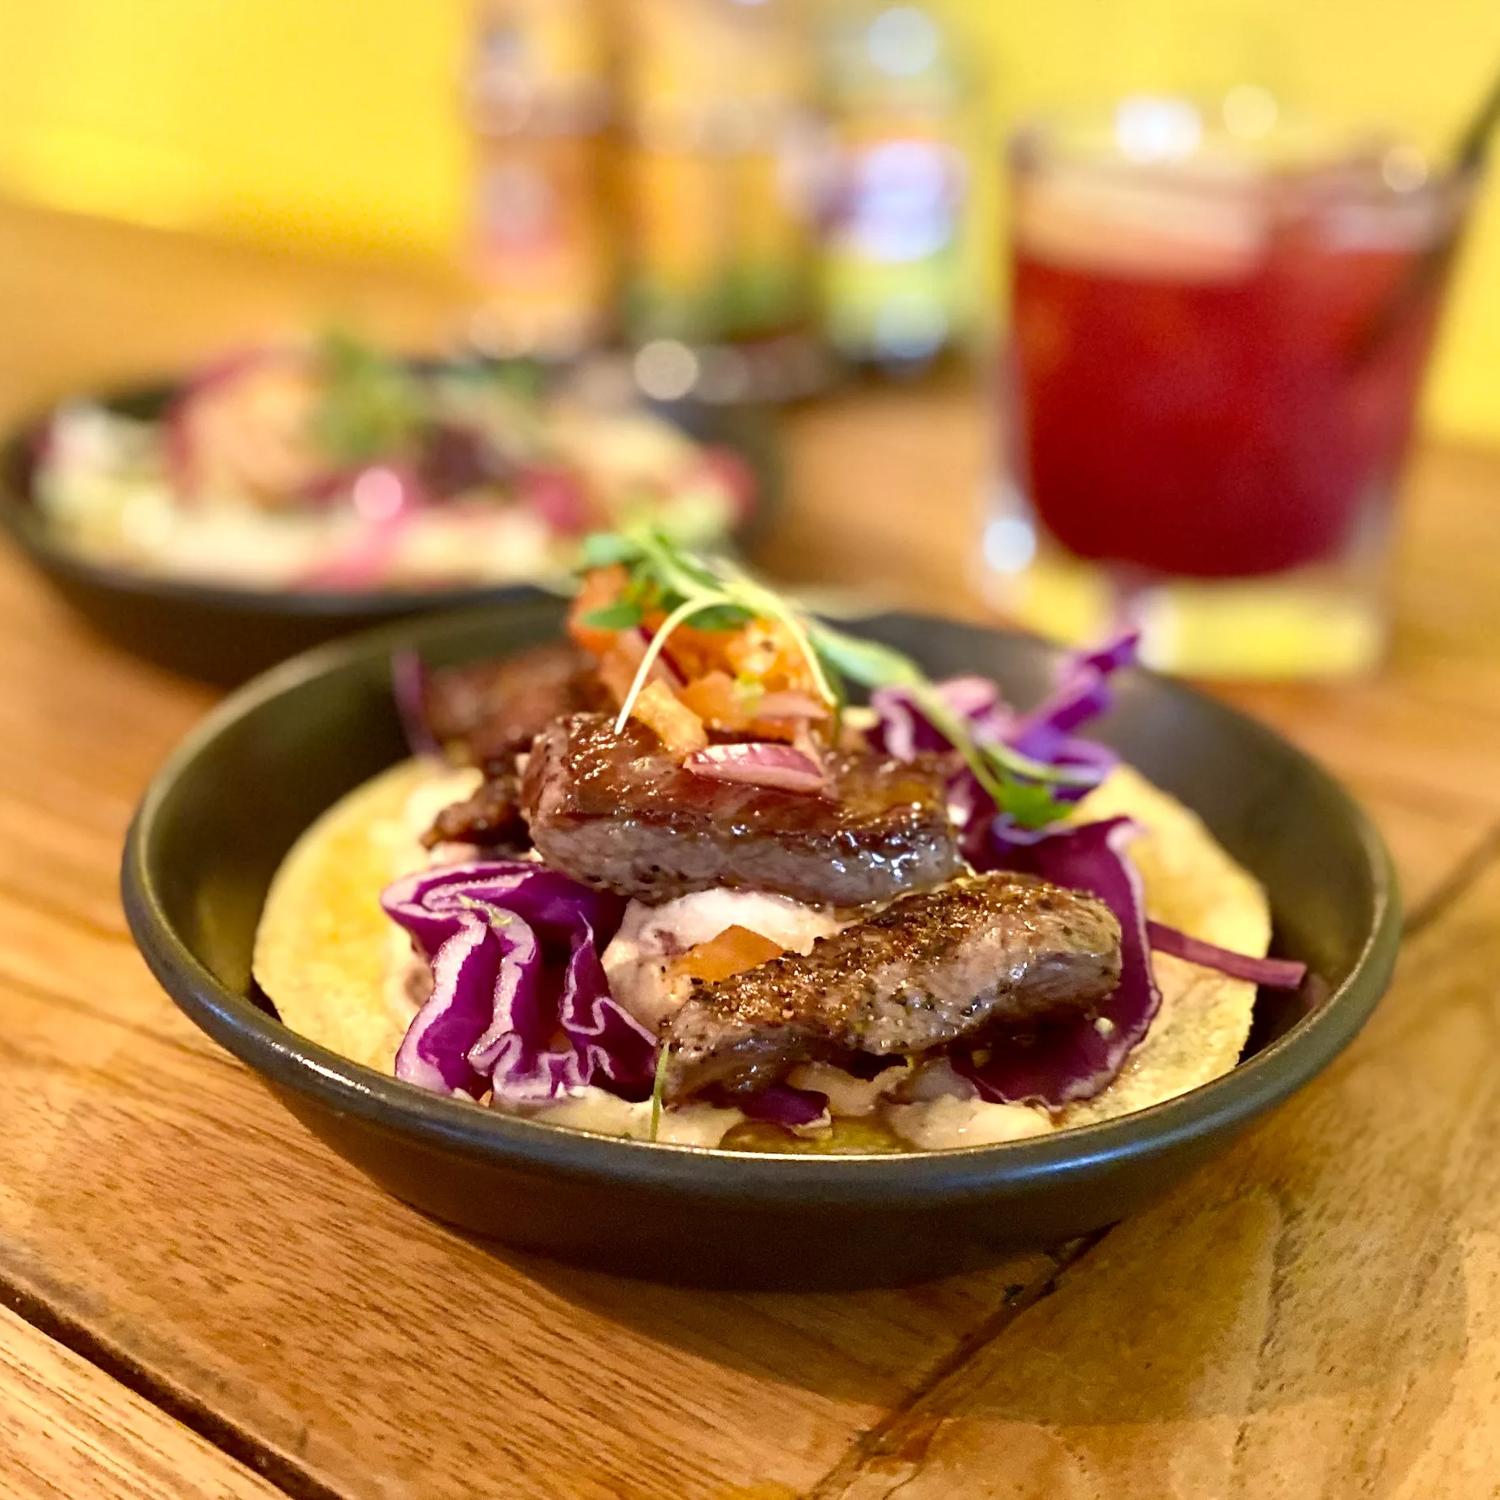 A steak taco dish served at Hola Mexican.